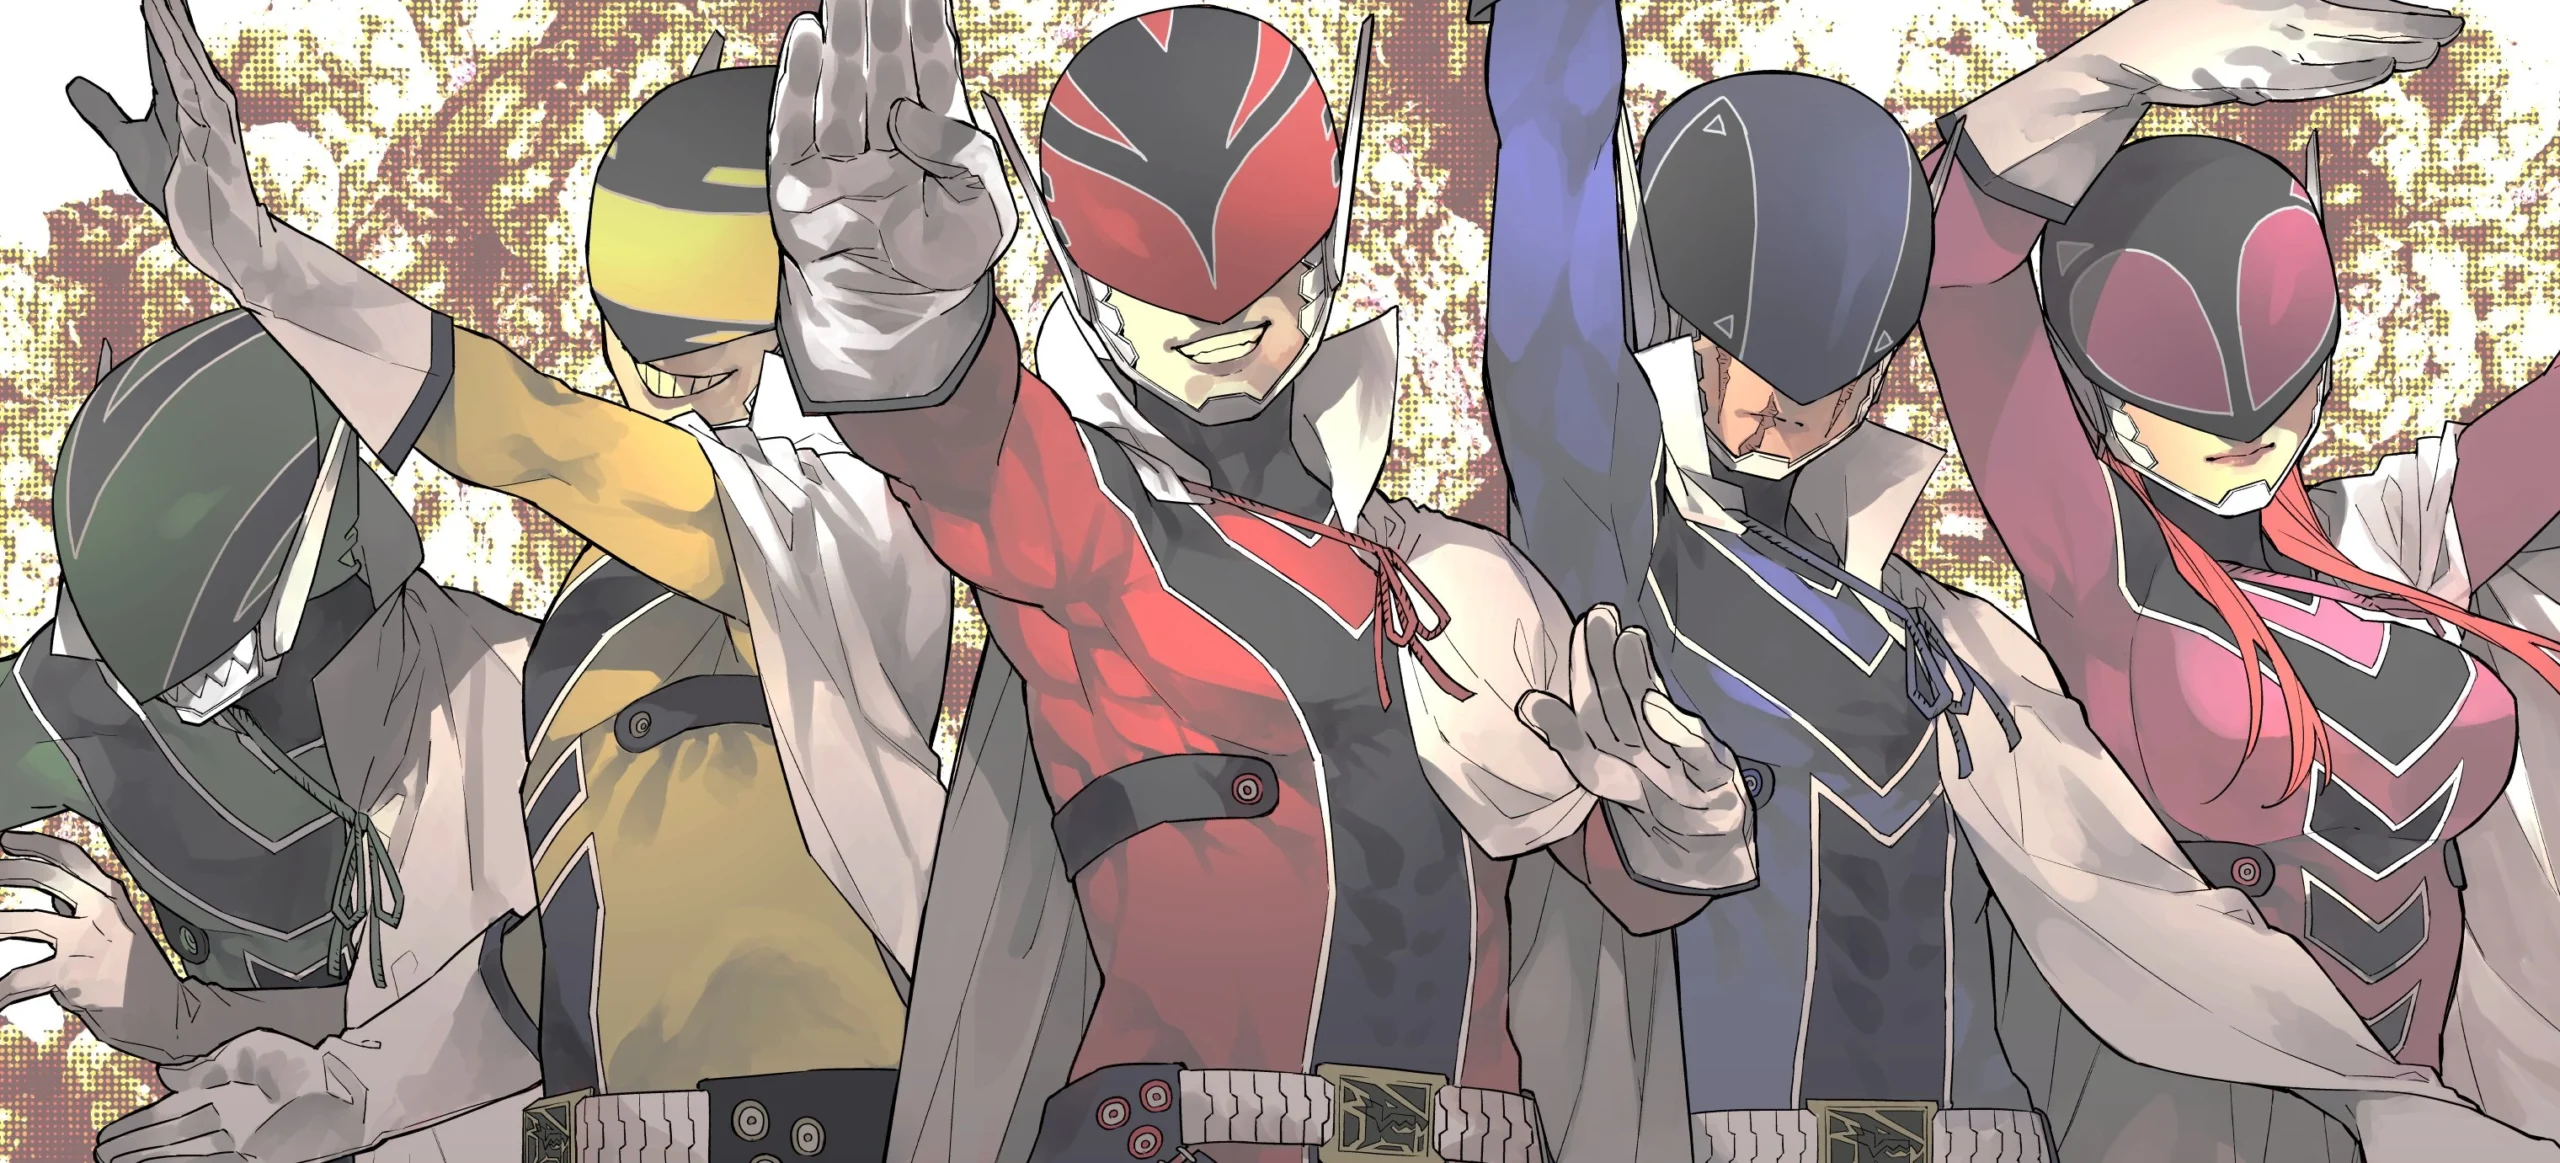 Ranger Reject' Sentai Manga Suits Up For An Anime Adaptation